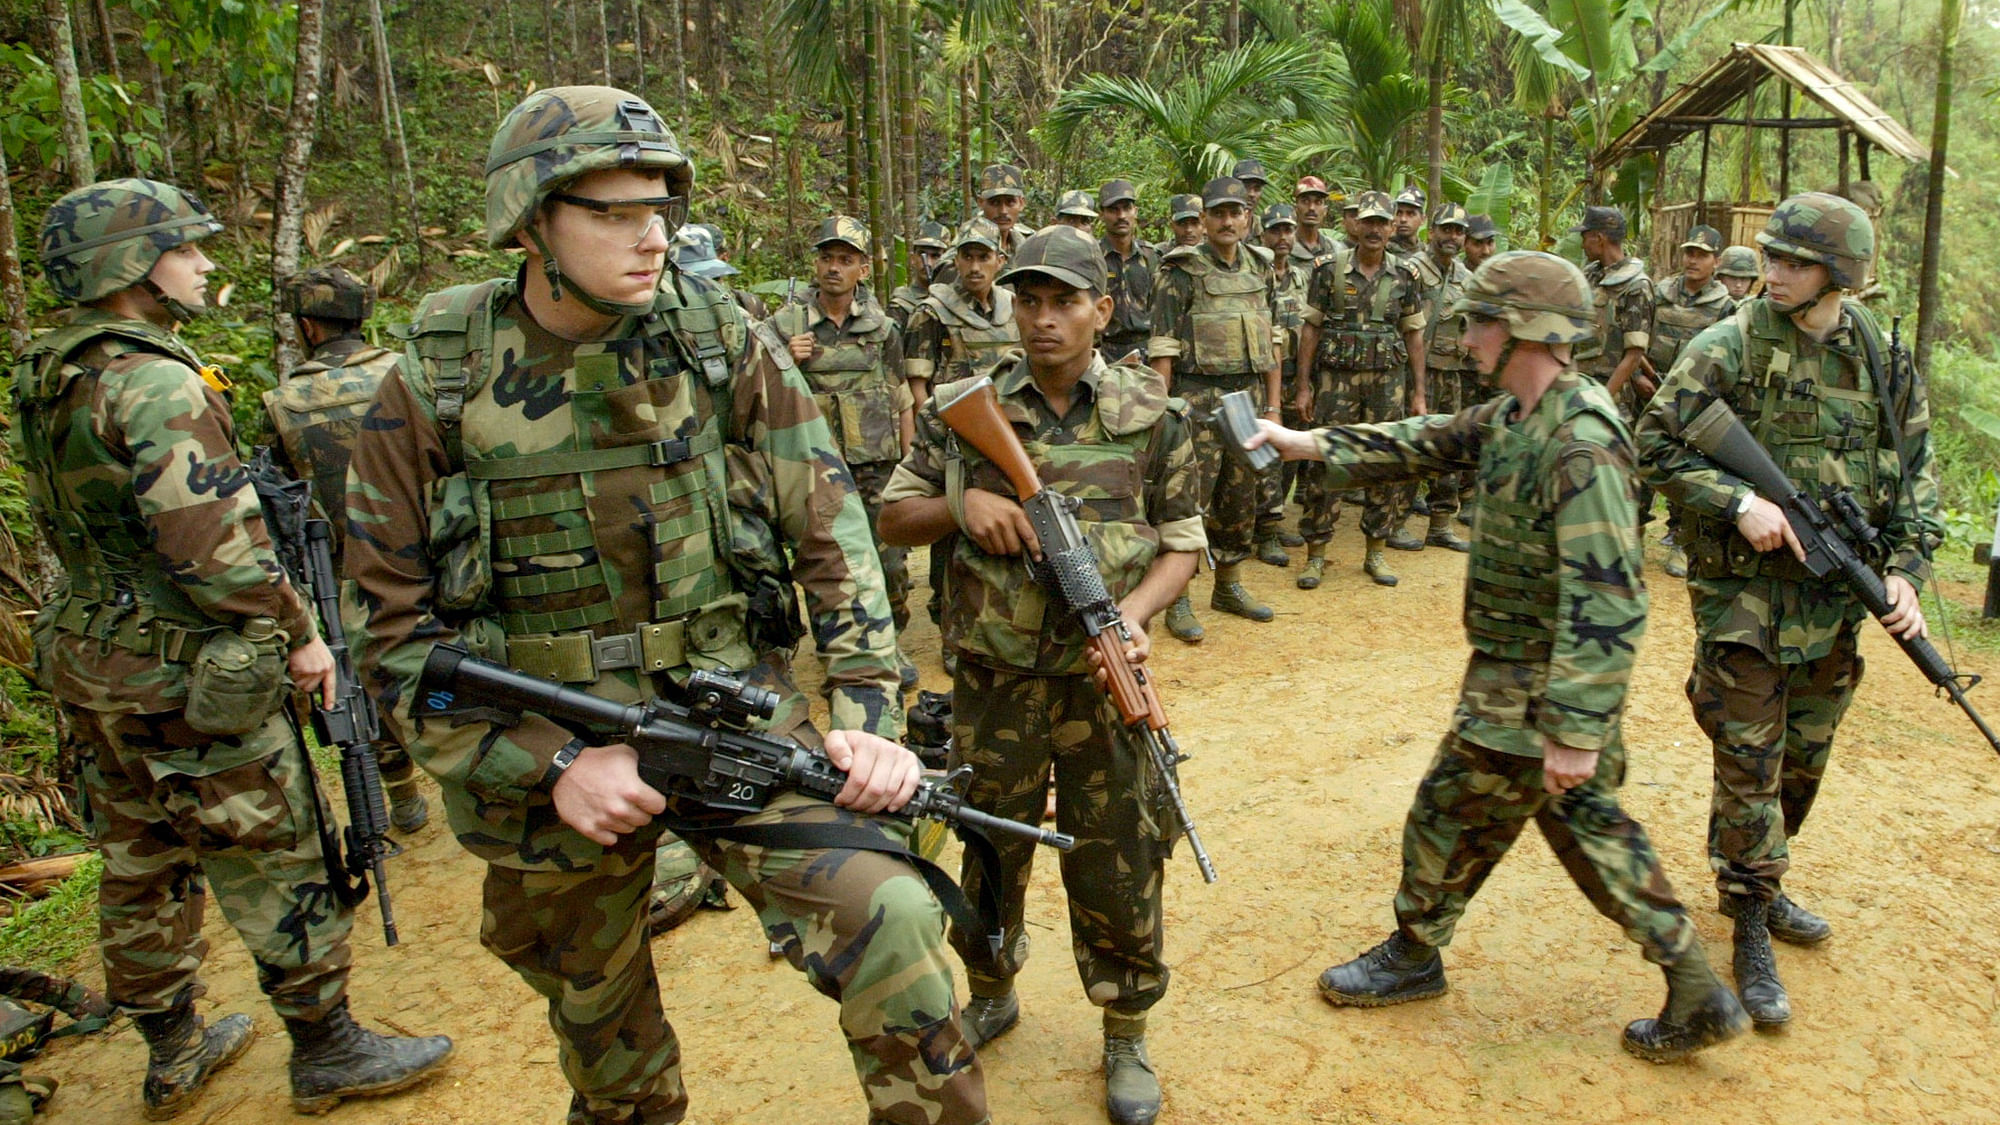 

Indian and US army soldiers take part in a joint military exercise in Kumbhirgram in Mizoram, 6 April 2004. (Photo: Reuters)